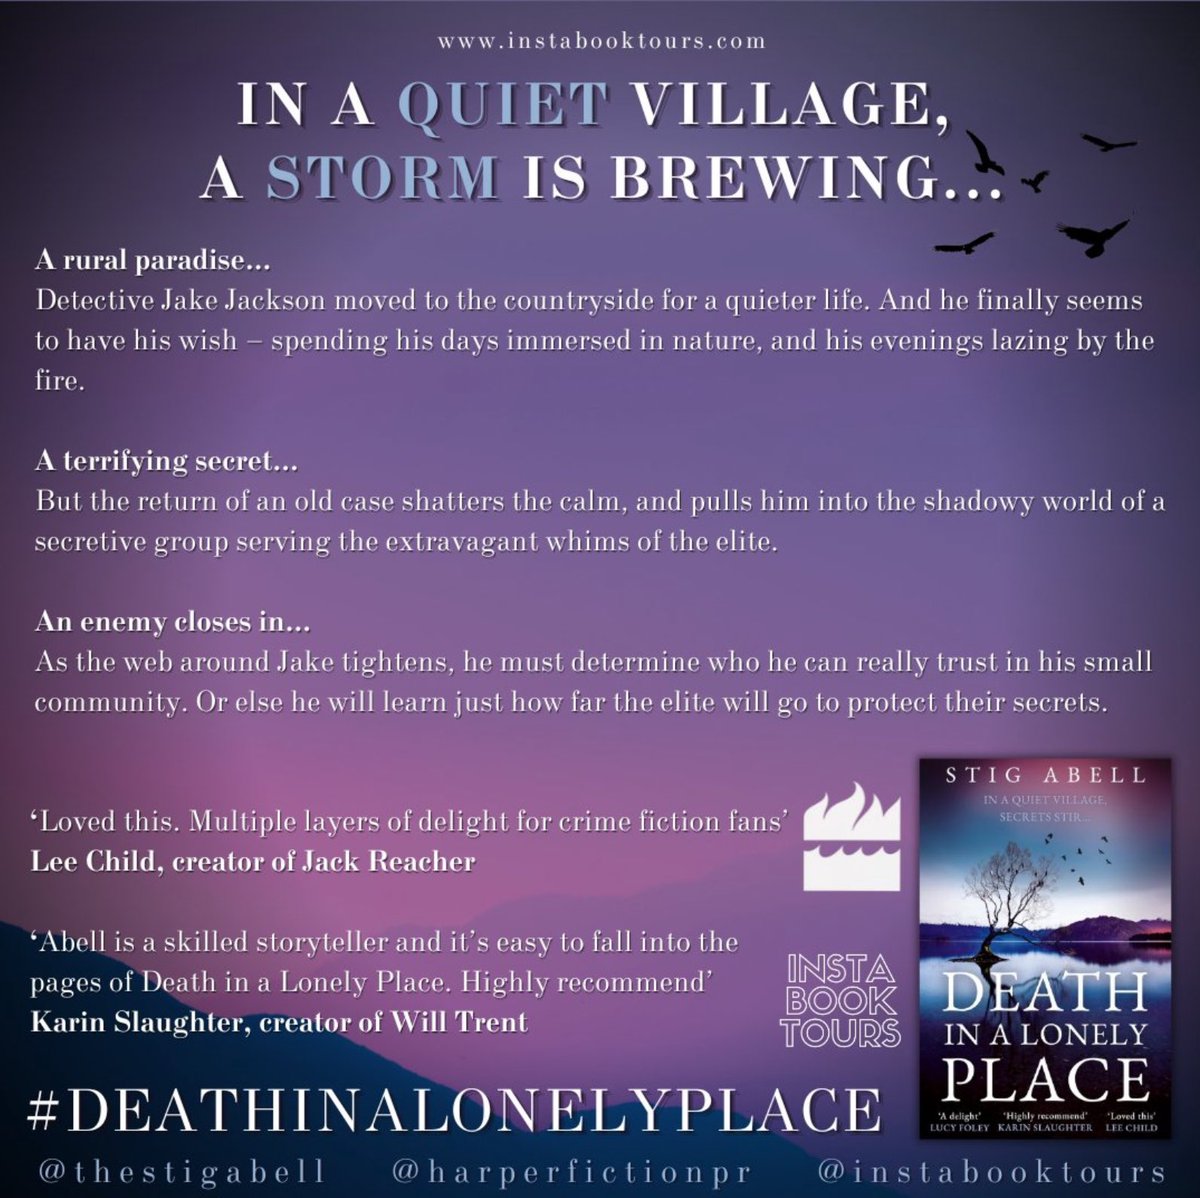 Very excited to be on the #DeathInALonelyPlace by @StigAbell  #BlogTour loved the first book is the series!